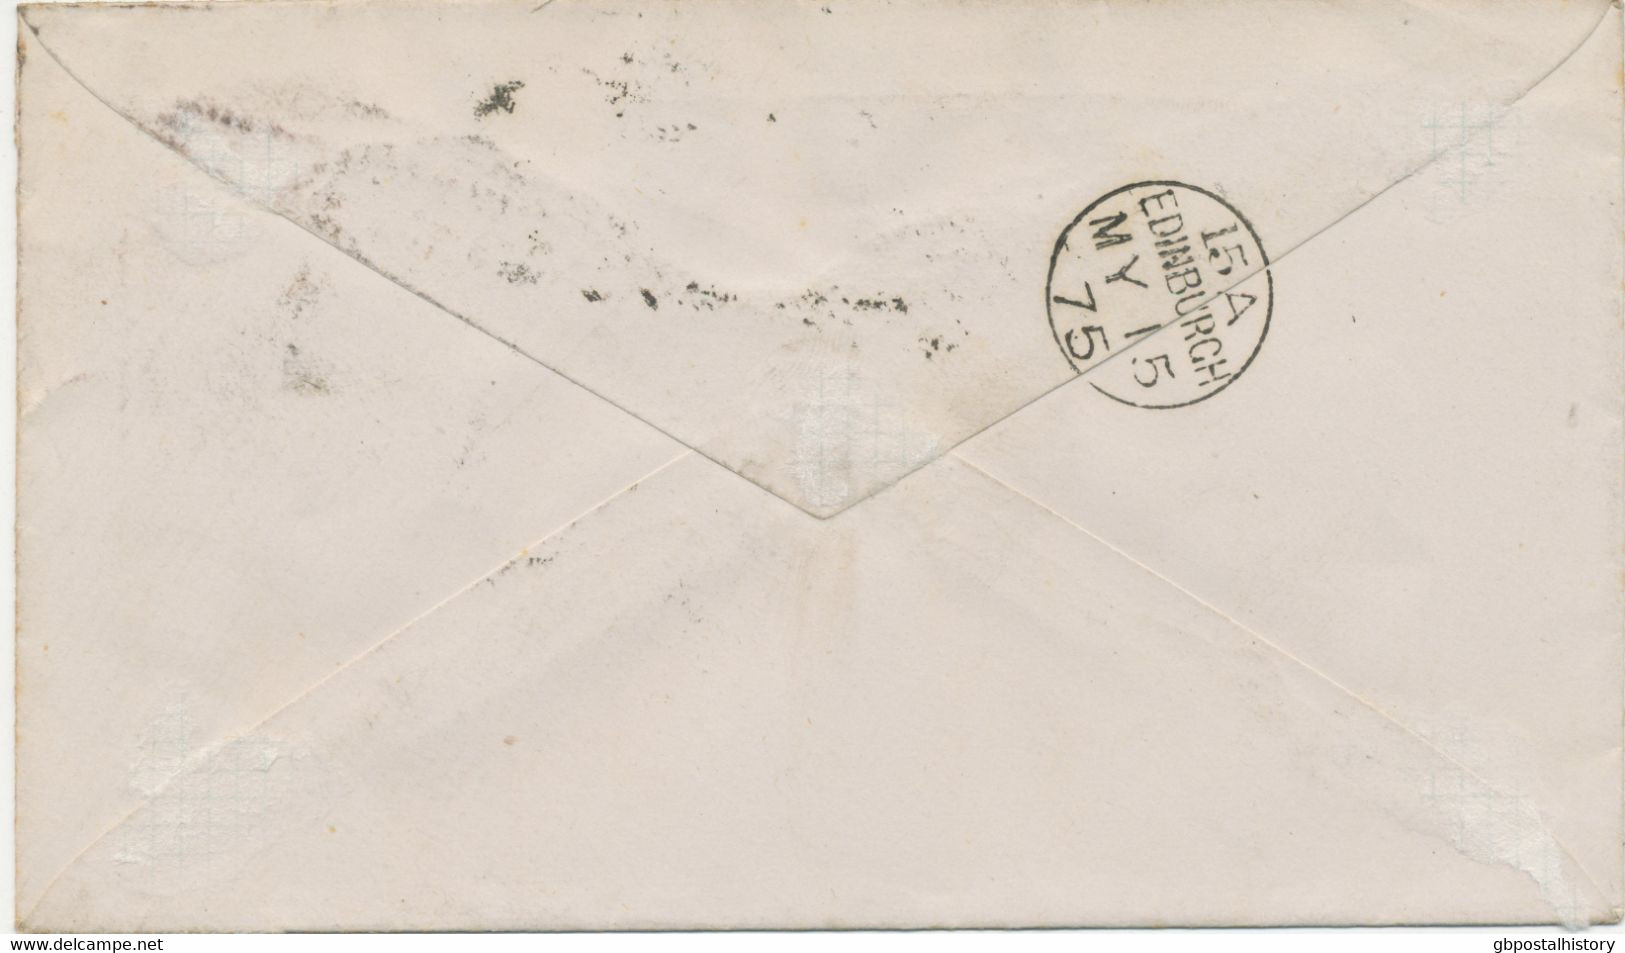 GB „159 / GLASGOW“ Scottish Duplex (4 Bars With Same Length, Time Code „2 &“, Datepart 20mm) On Very Fine Cover - Briefe U. Dokumente